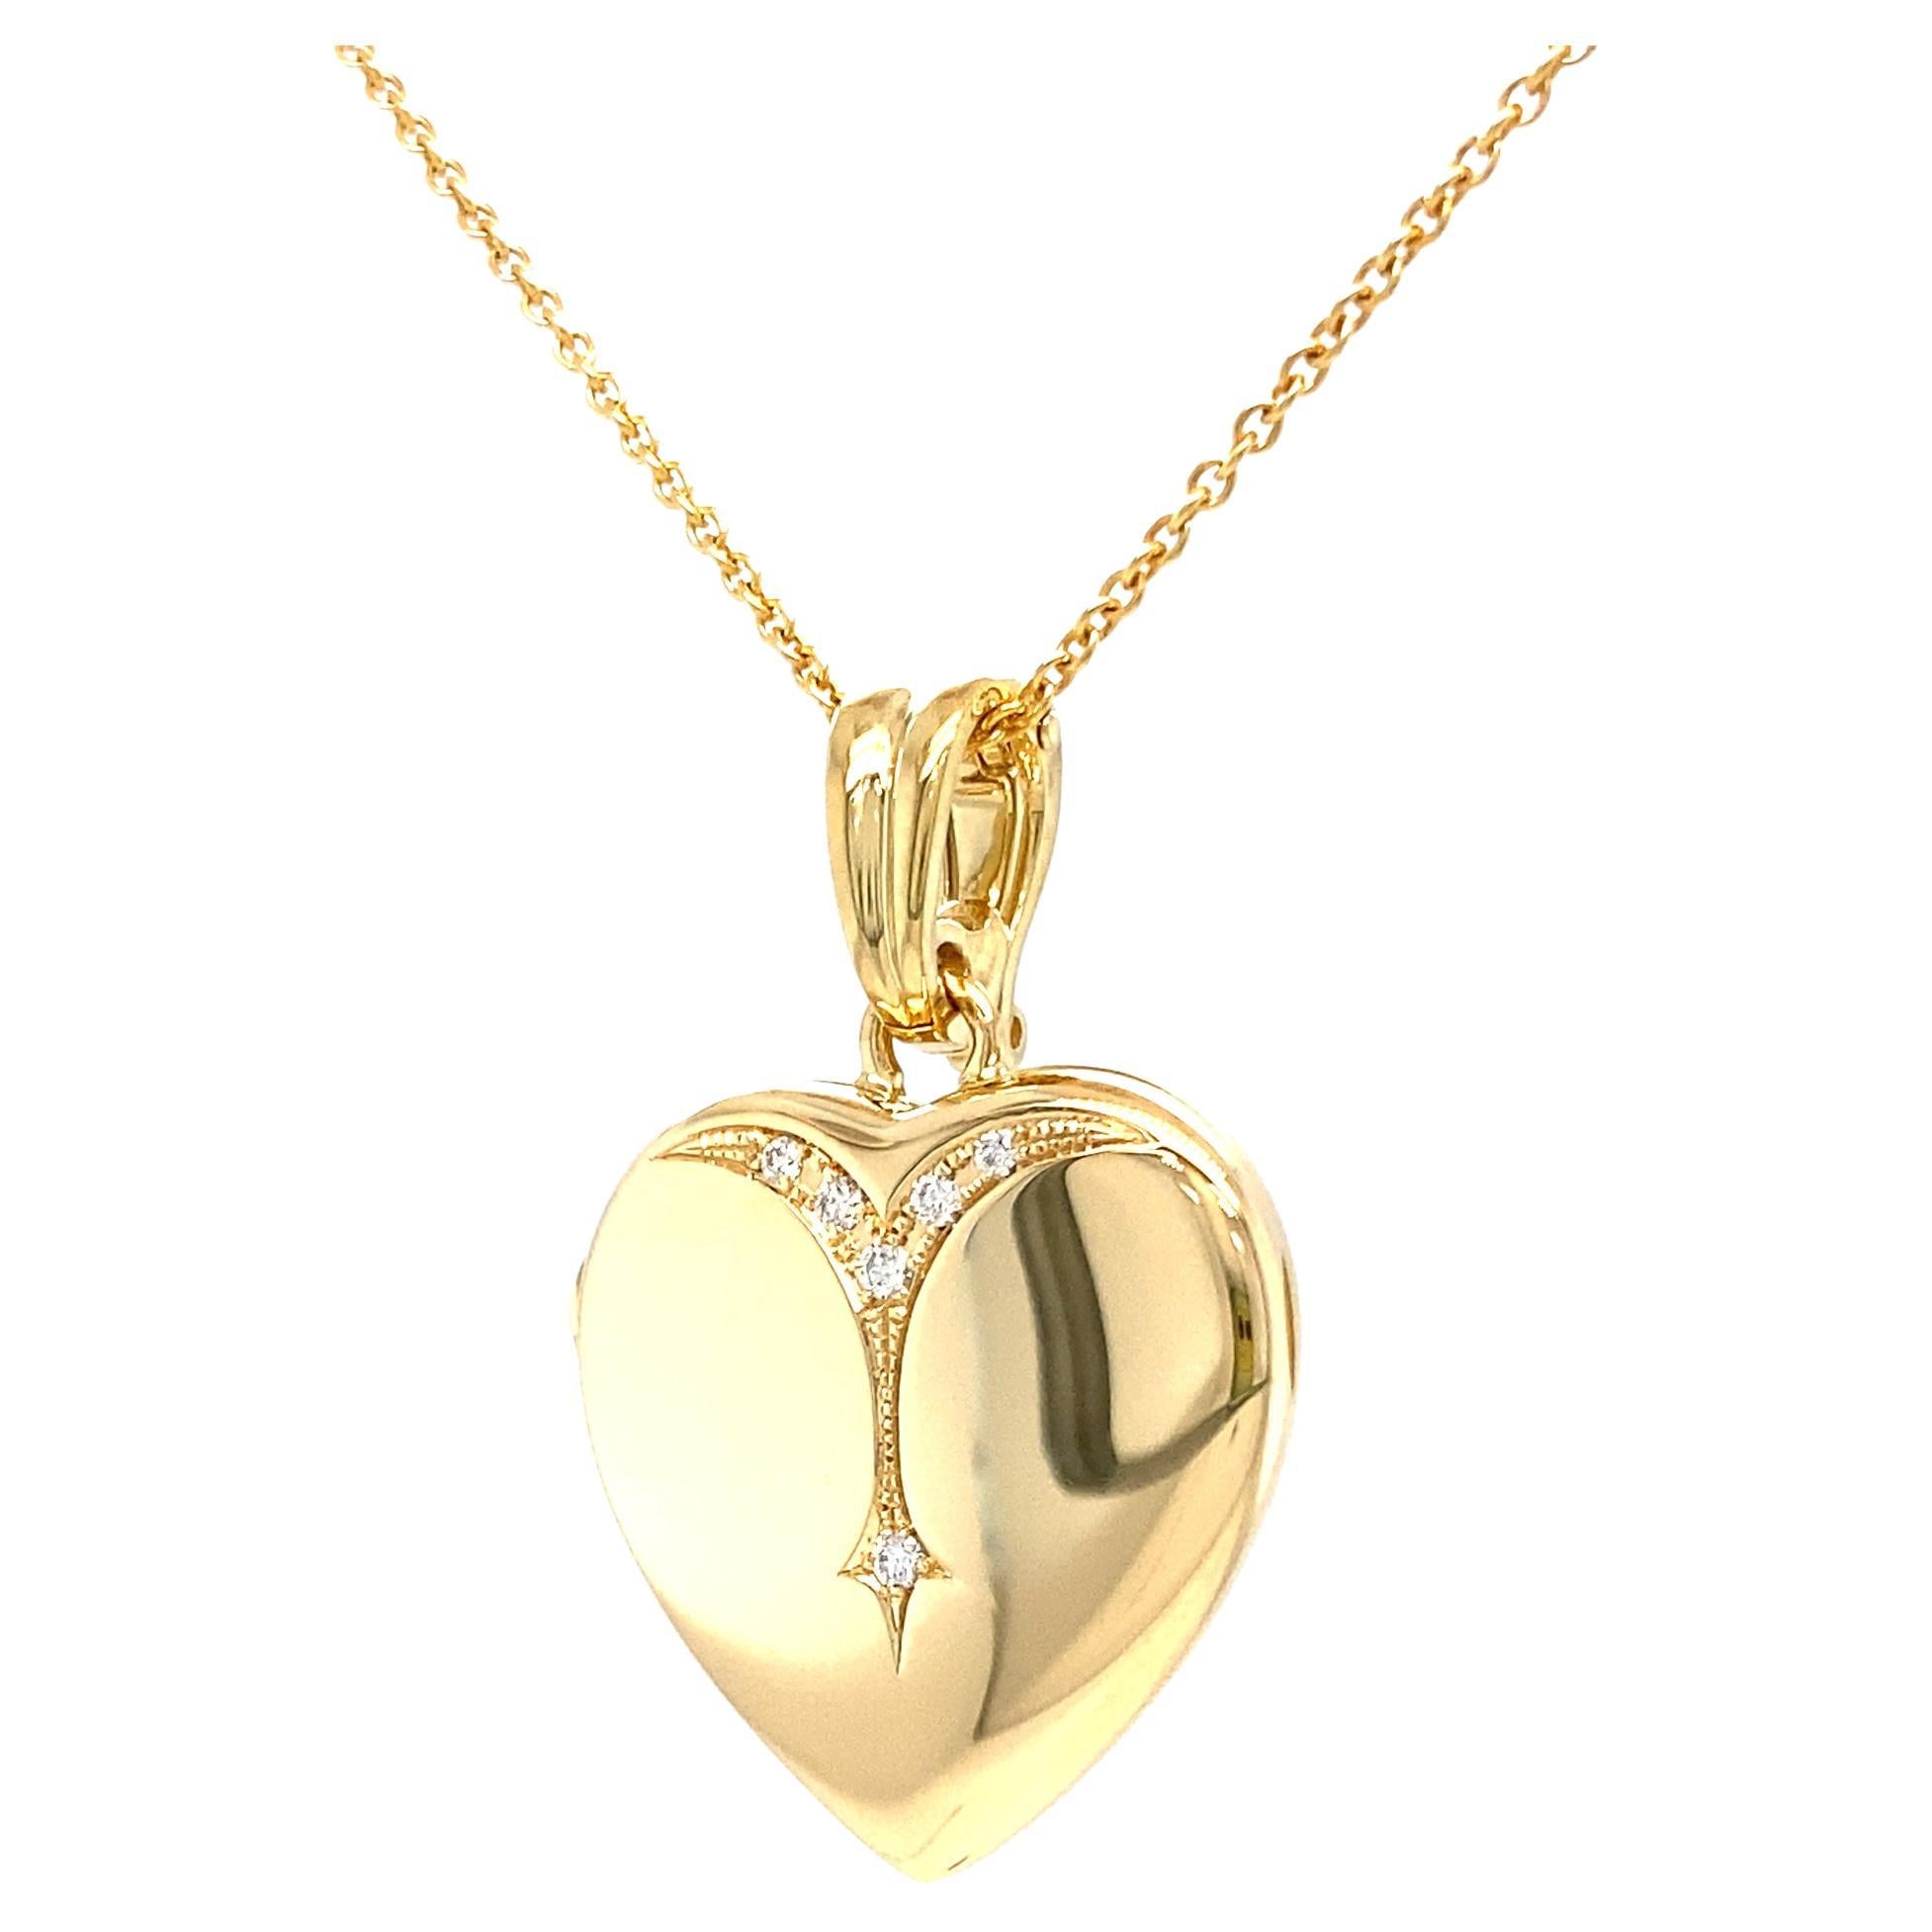 Polished Heart Locket Pendant Necklace - 18k Yellow Gold - 6 Diamonds 0.09 ct For Sale